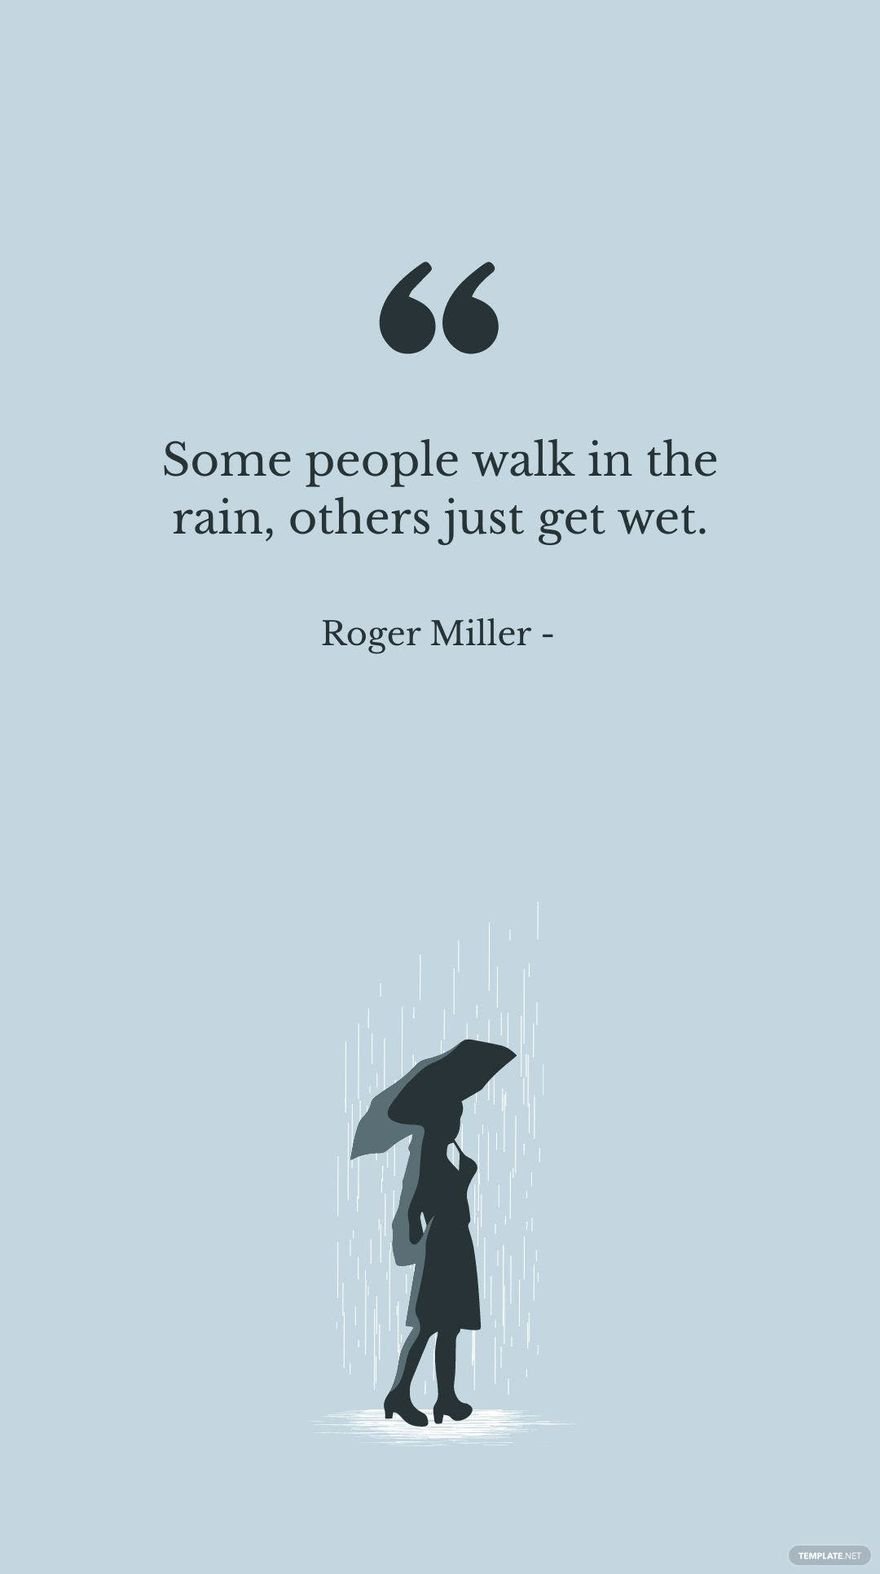 Roger Miller - Some people walk in the rain, others just get wet. in JPG